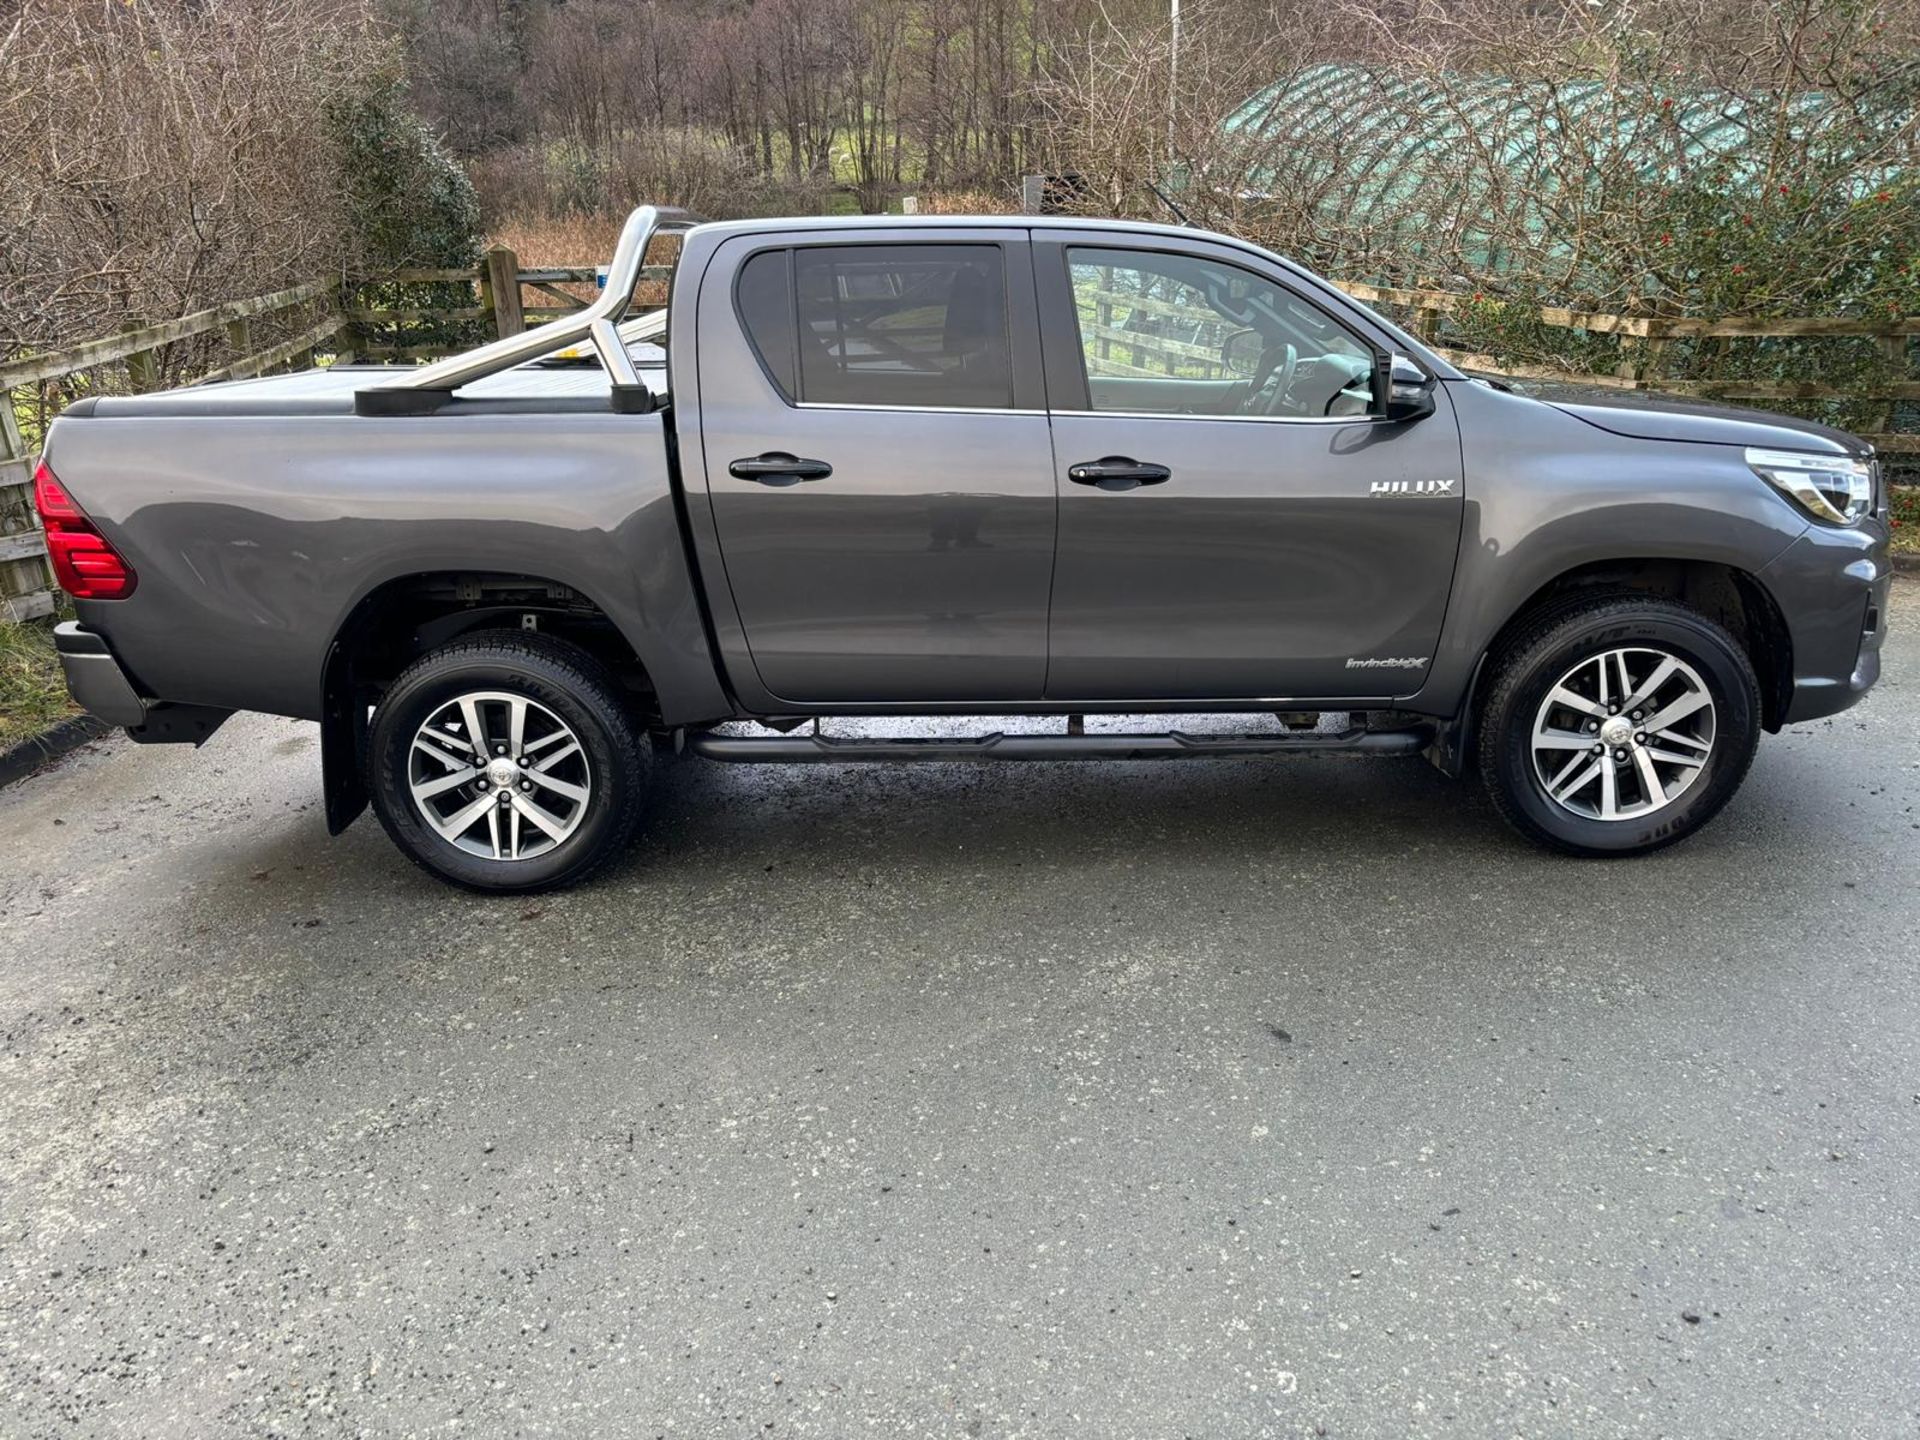 TOYOTA HILUX INVINCIBLE X DOUBLE CAB PICKUP TRUCK 4X4 AUTOMATIC 64K 4WD TWIN CAB - Image 4 of 13